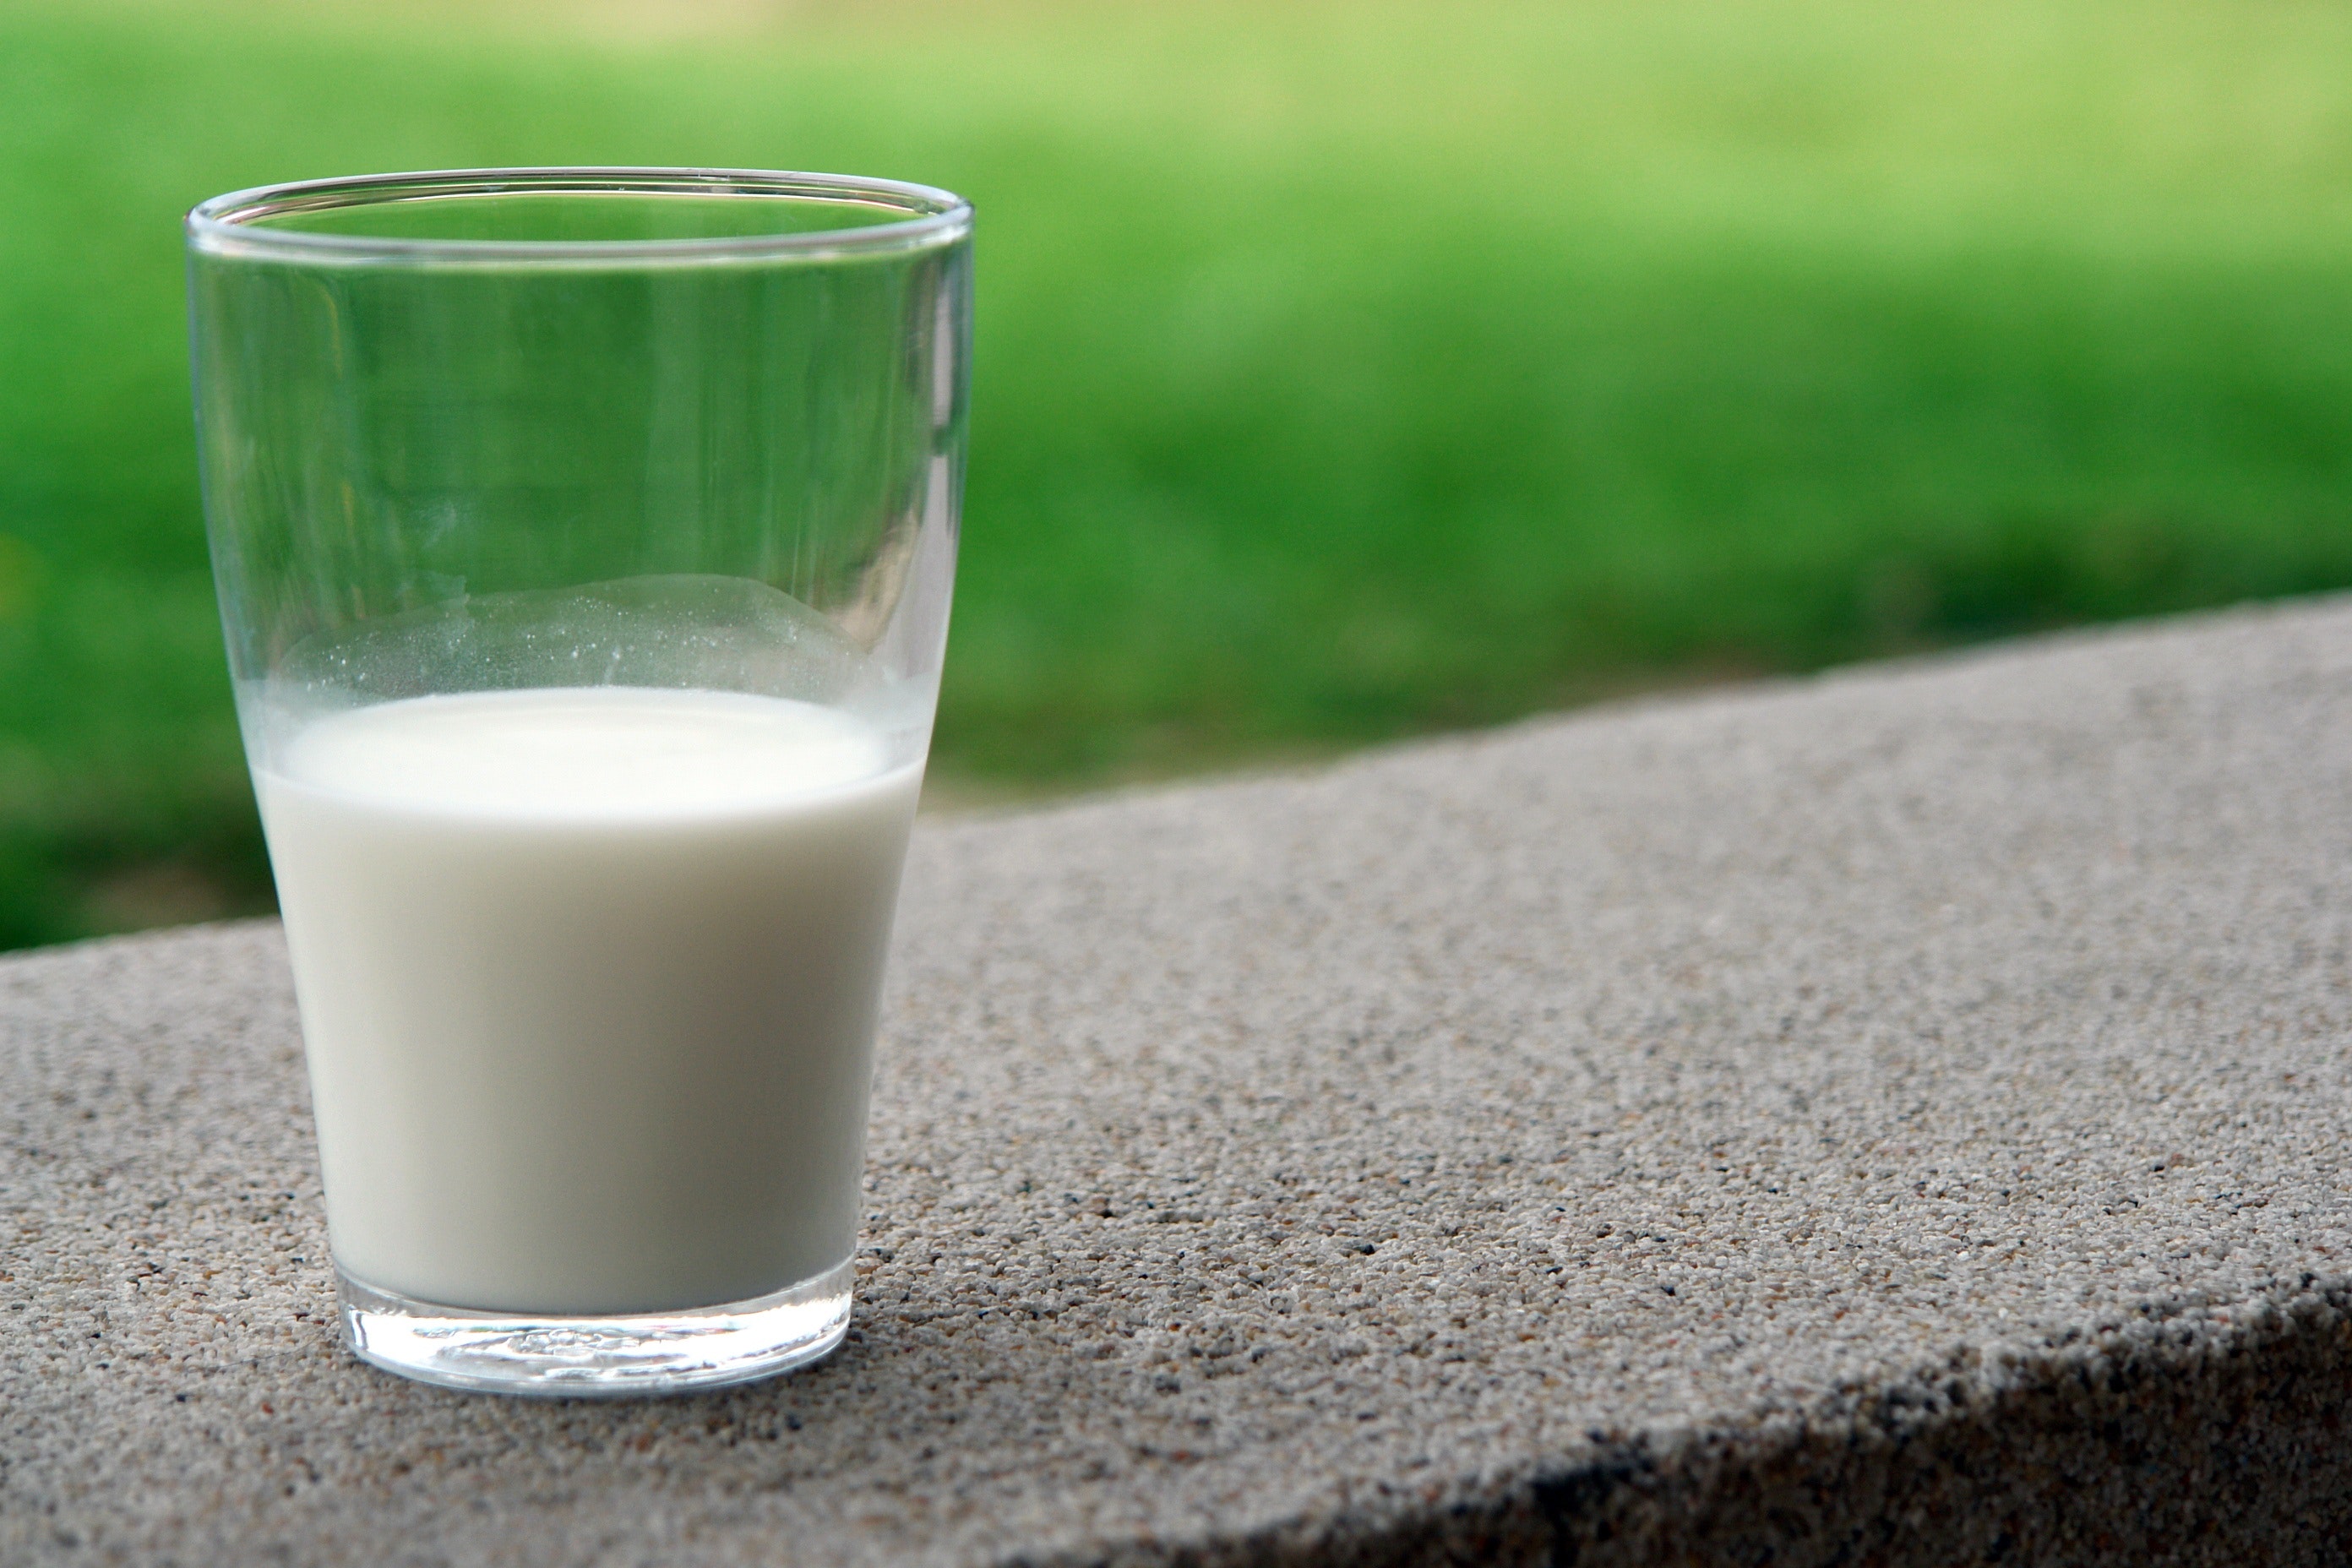 According to food law, milk in Canada is fortified with vitamin D.